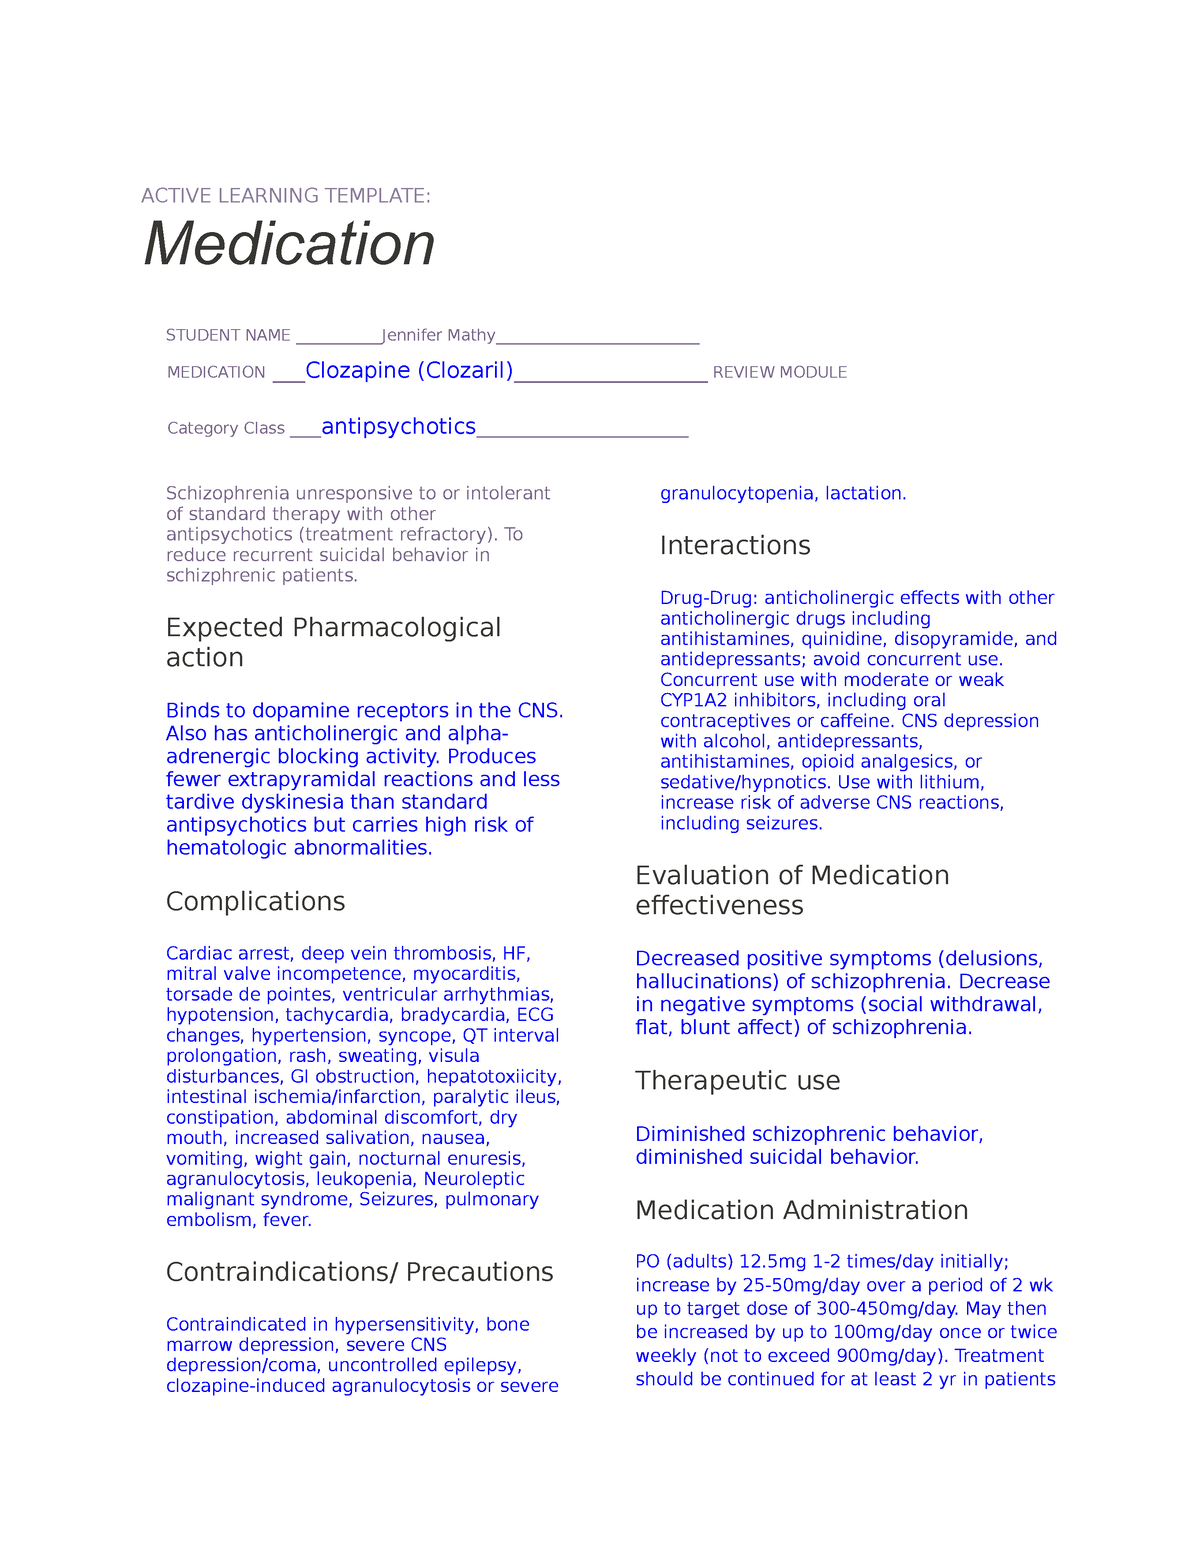 clozapine-clozaril-meds-active-learning-template-medication